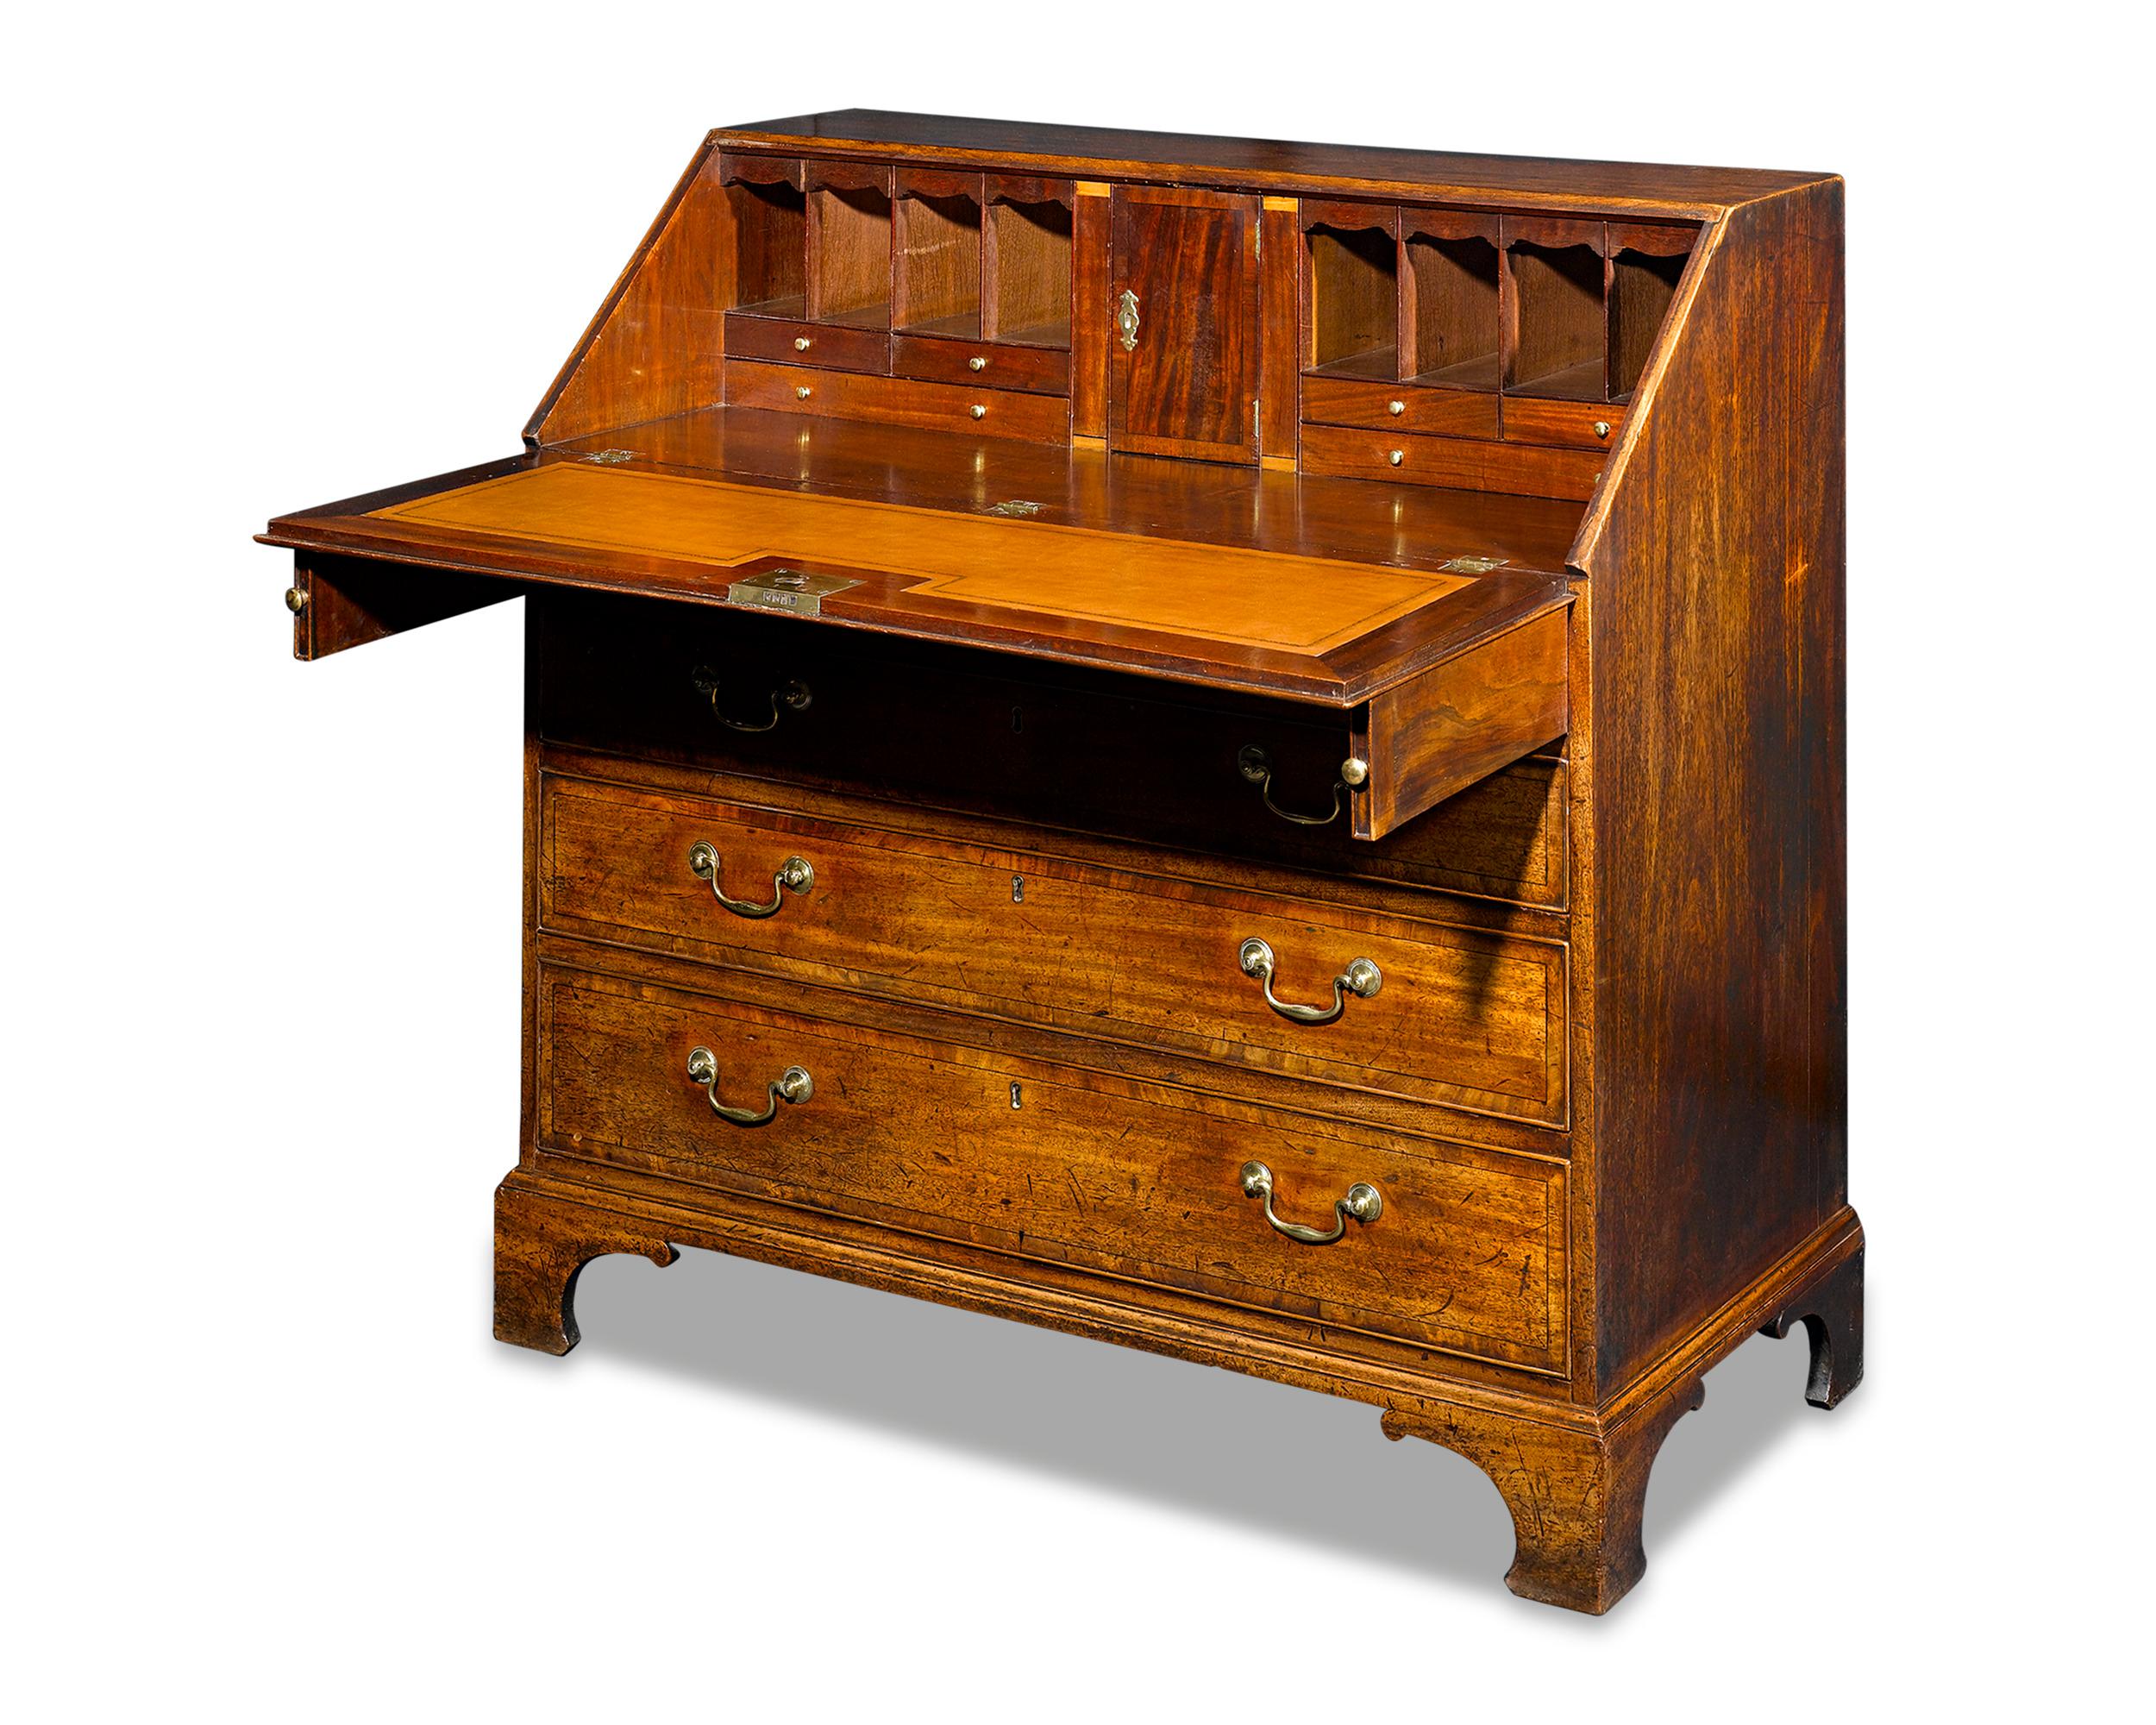 This classic bureau writing desk is a brilliant specimen of Georgian furniture. Crafted of mahogany that has aged to a rich patina, this desk features a drop-front writing desk that opens to reveal a spacious surface and an array of compartments.